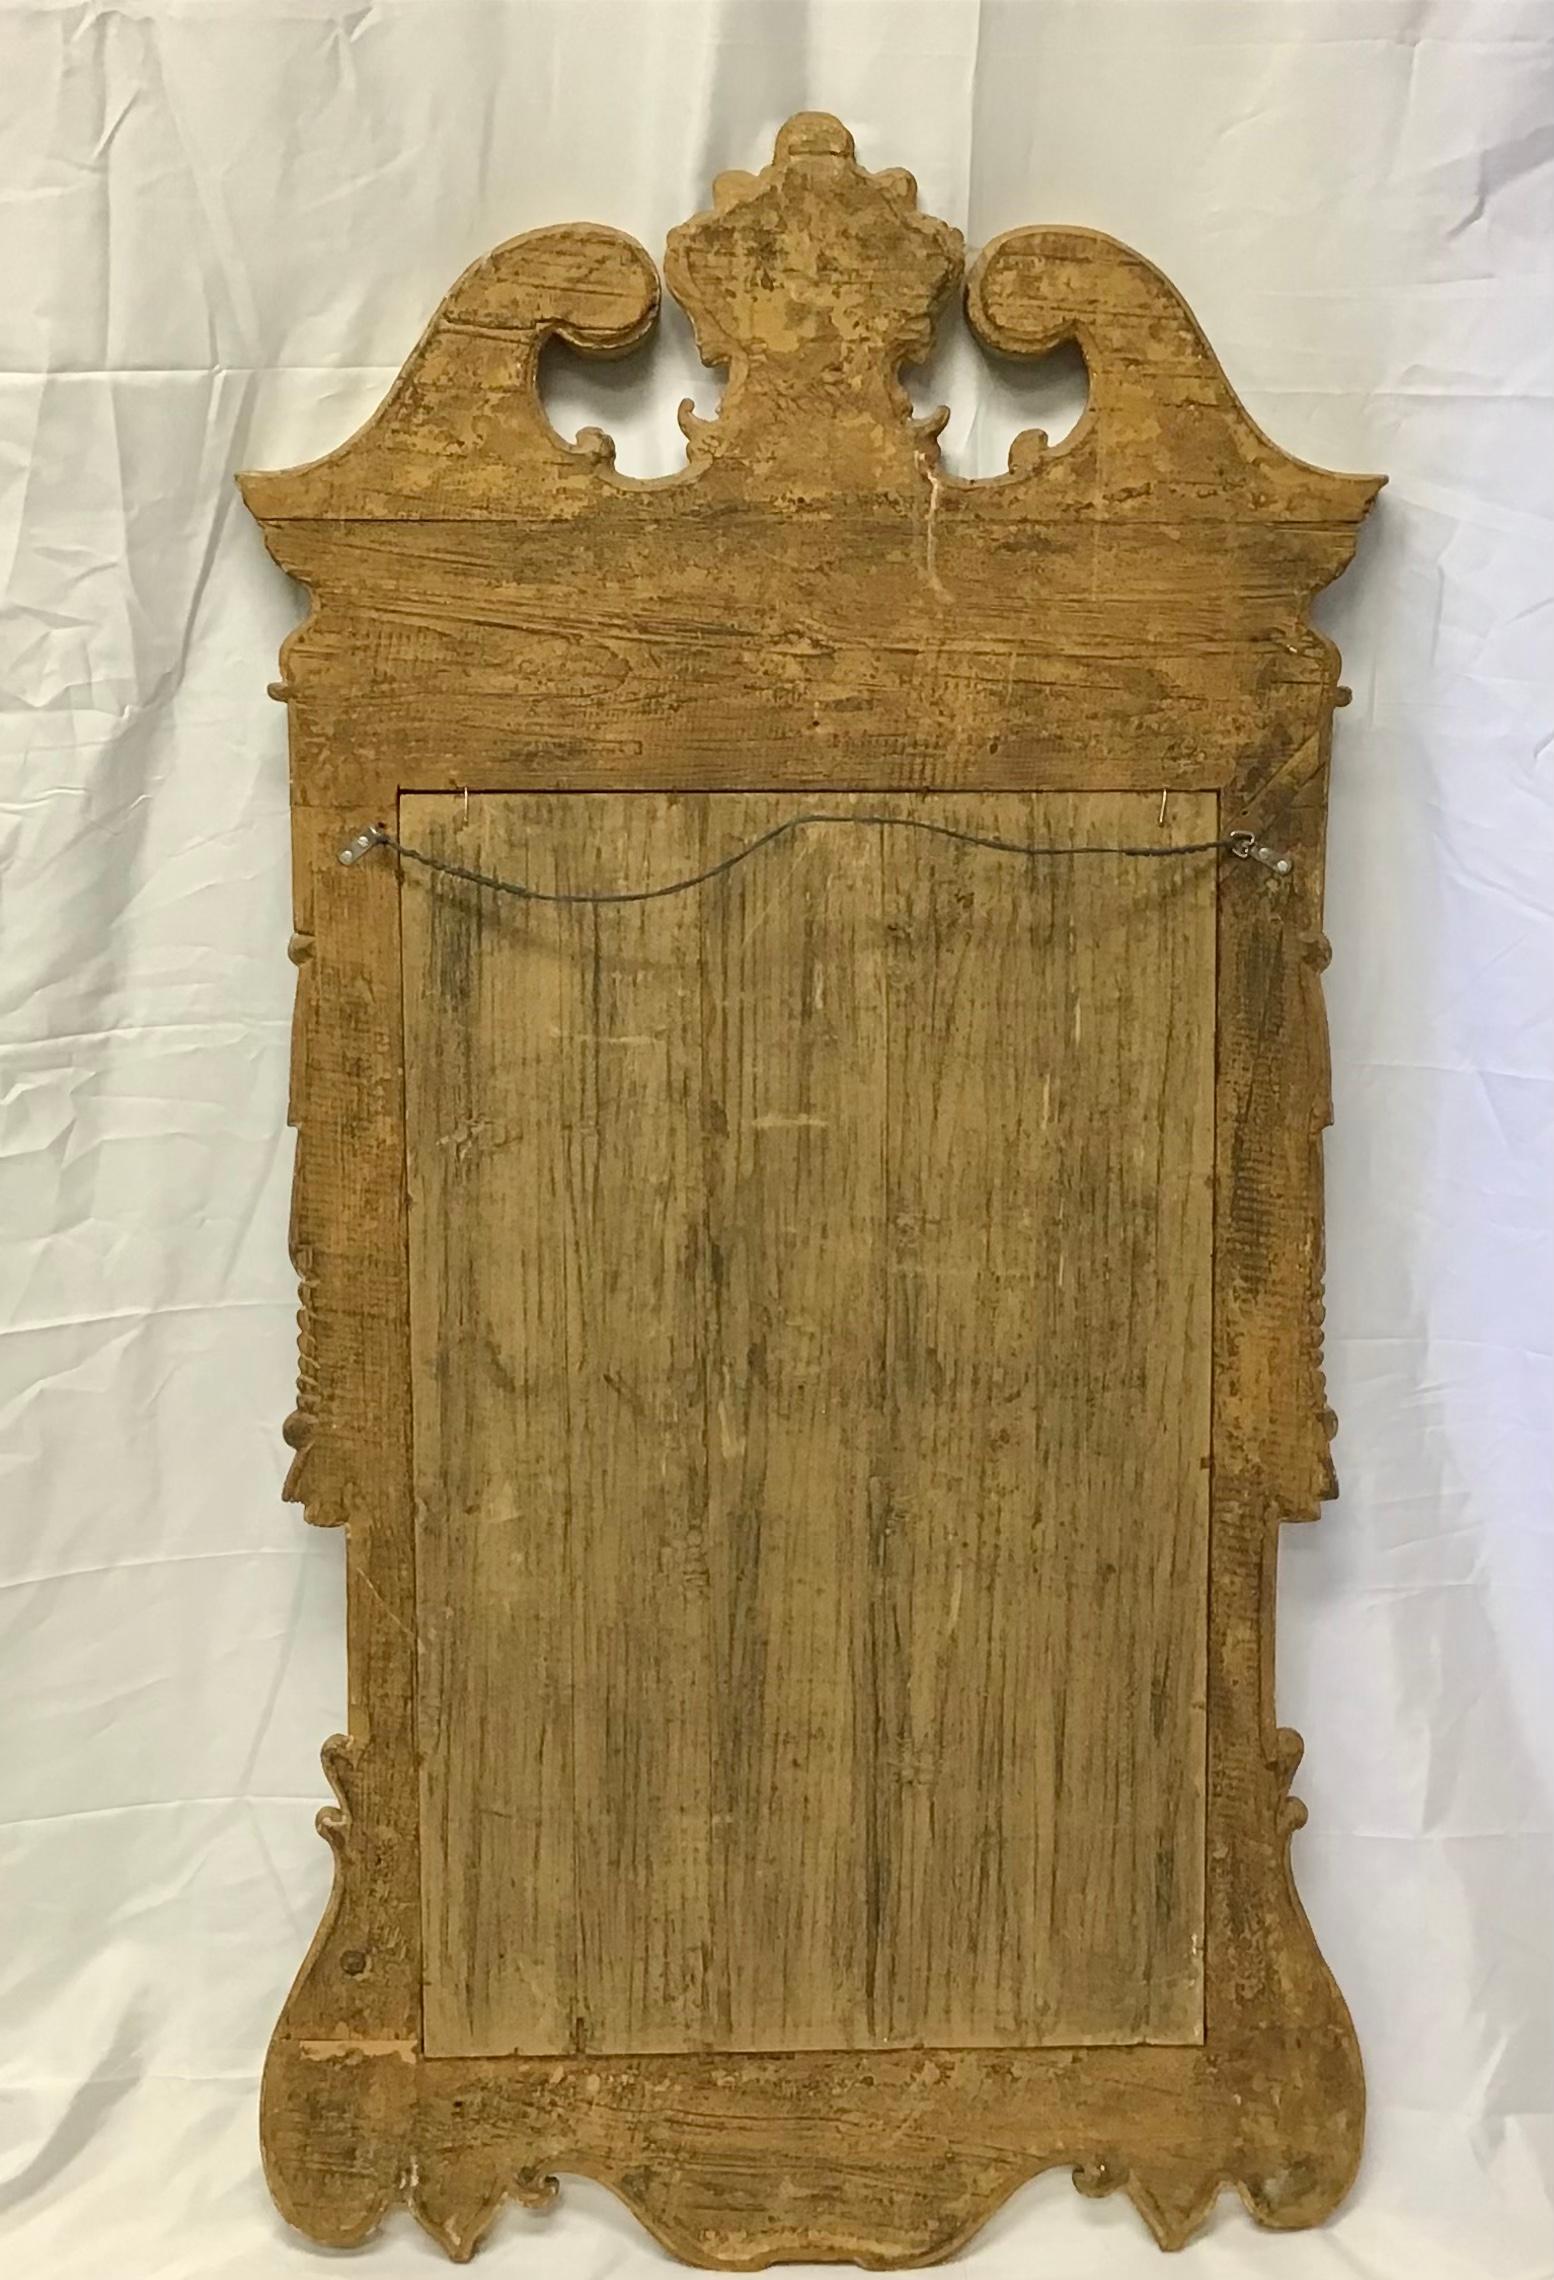 A fabulous Georgian style carved giltwood wall mirror dating from the mid 20th century with decoration typical of Georgian period. This antique mirror is exquisitely carved with scrolls, acanthus leaves, swags and shell and a distinctive pediment